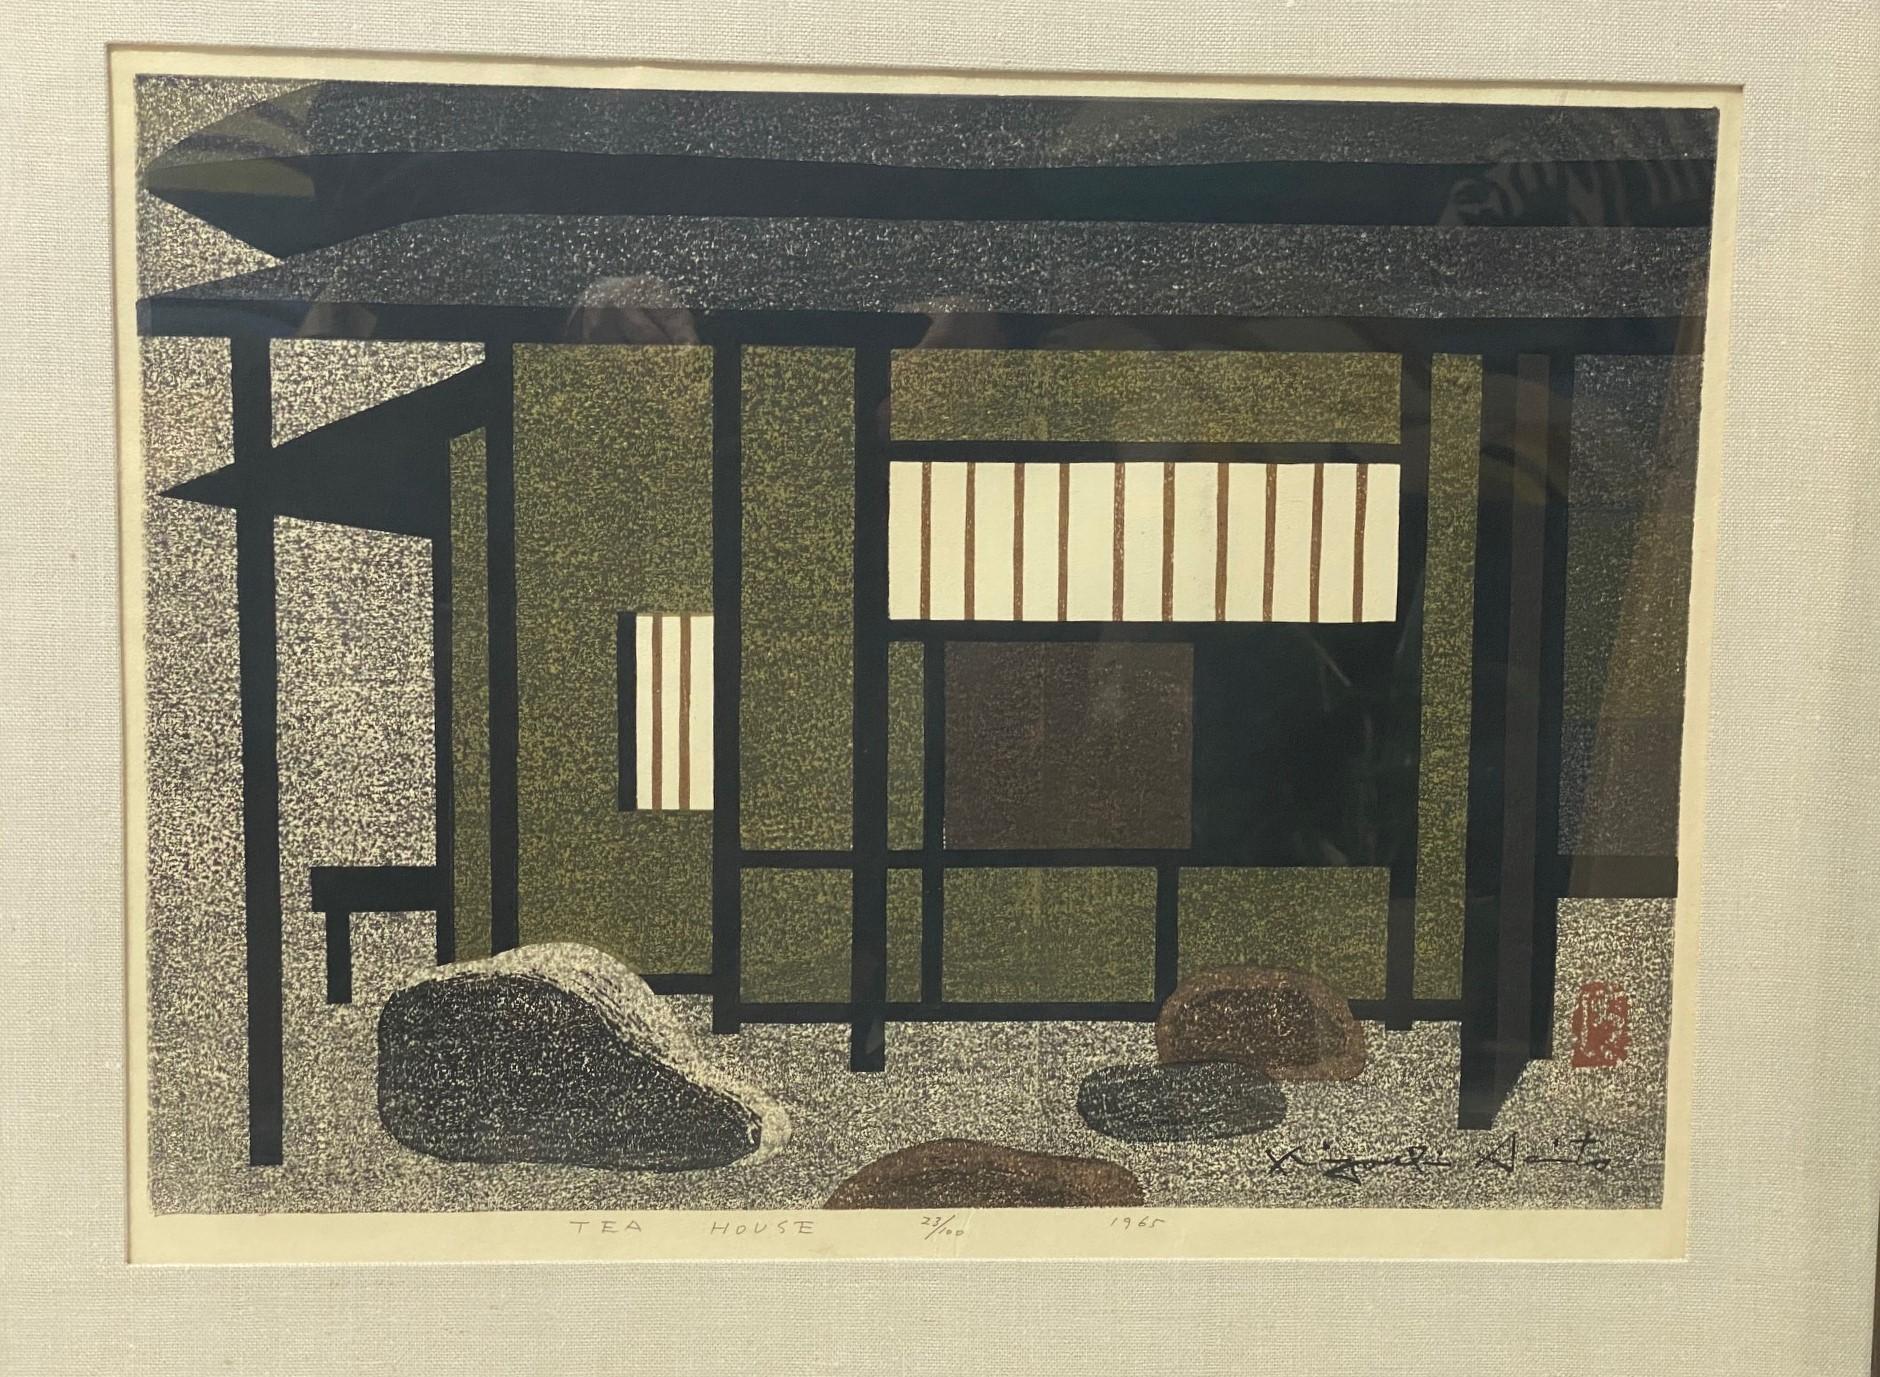 Kiyoshi Saito Signed Limited Edition Japanese Woodblock Print Tea House, 1965 In Good Condition For Sale In Studio City, CA